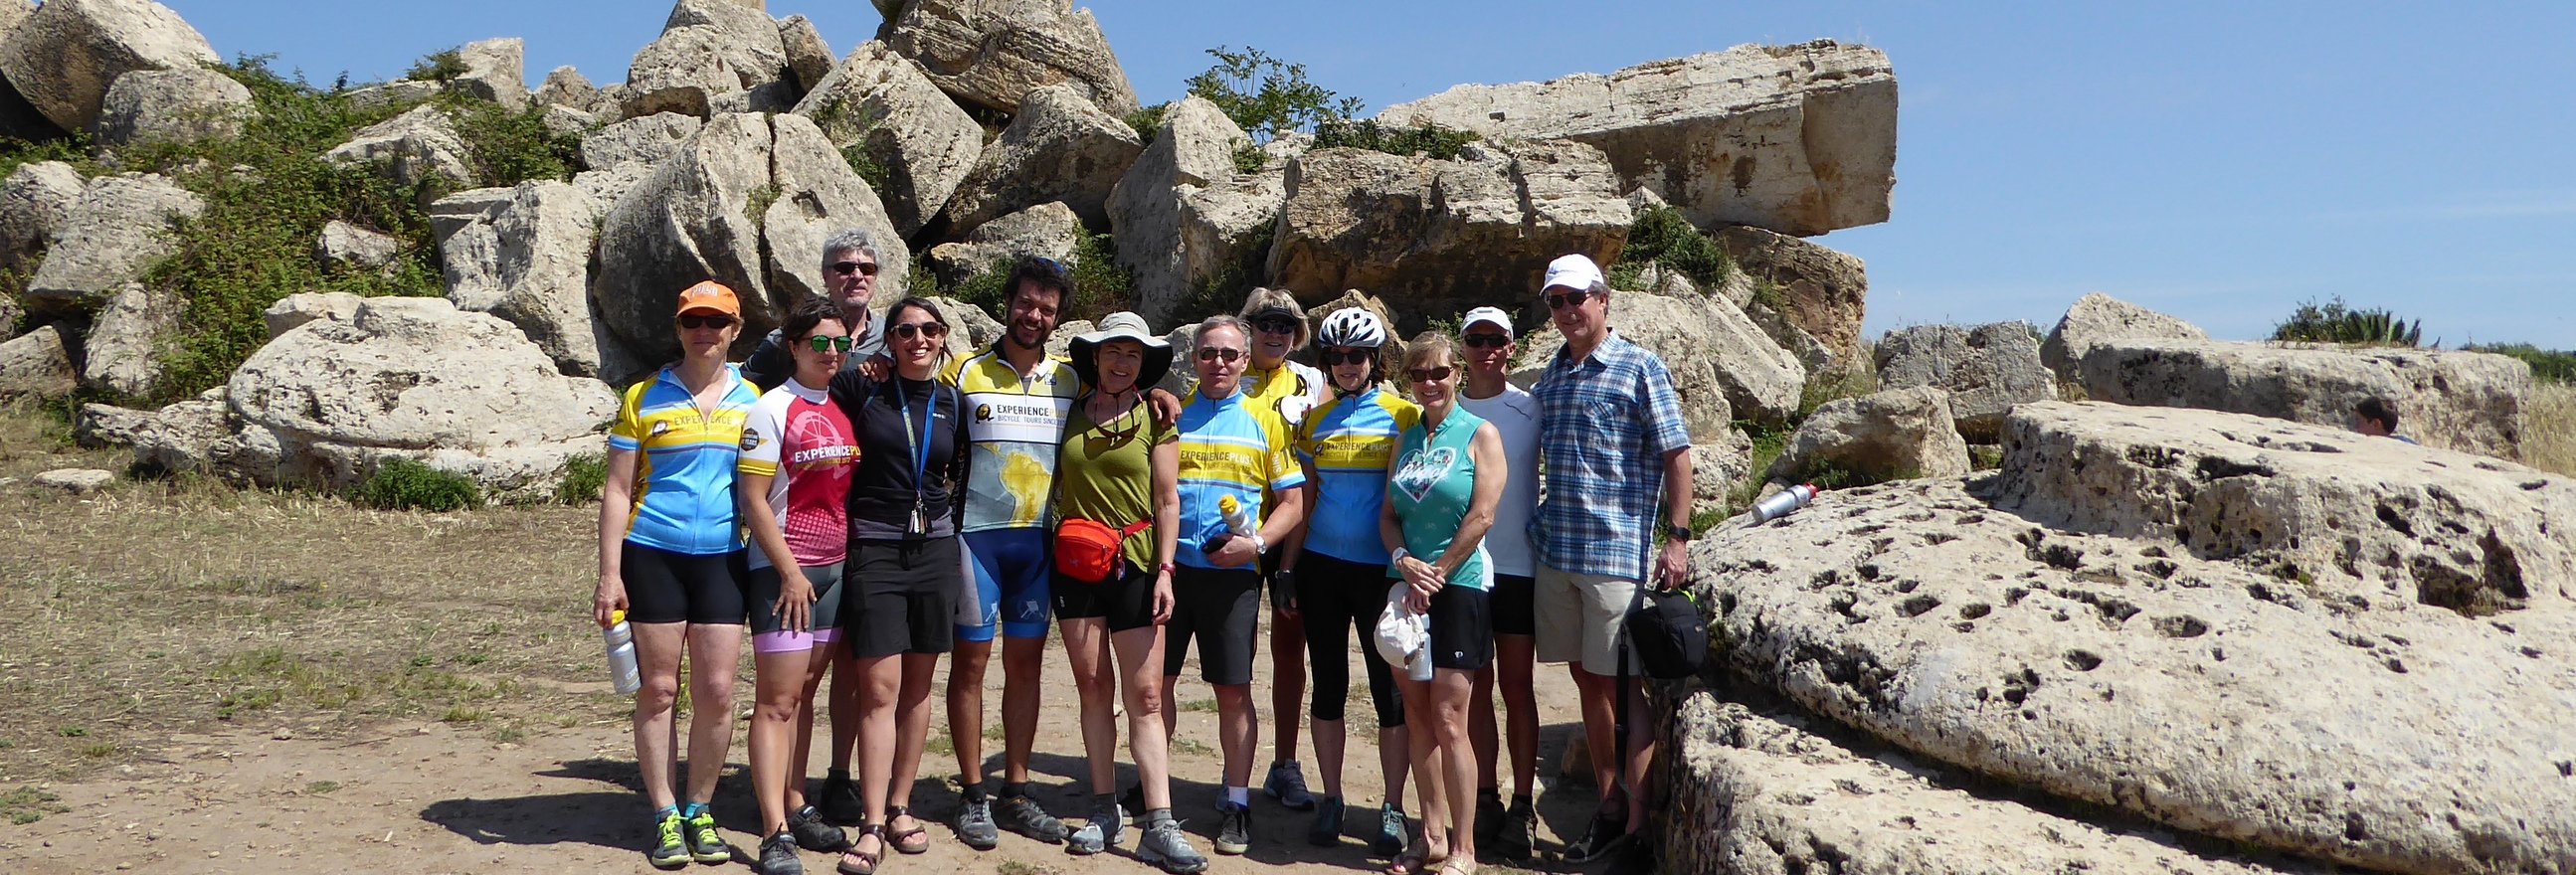 cycling in Sicily with a group of friends on a guided bike tour in Sicily.